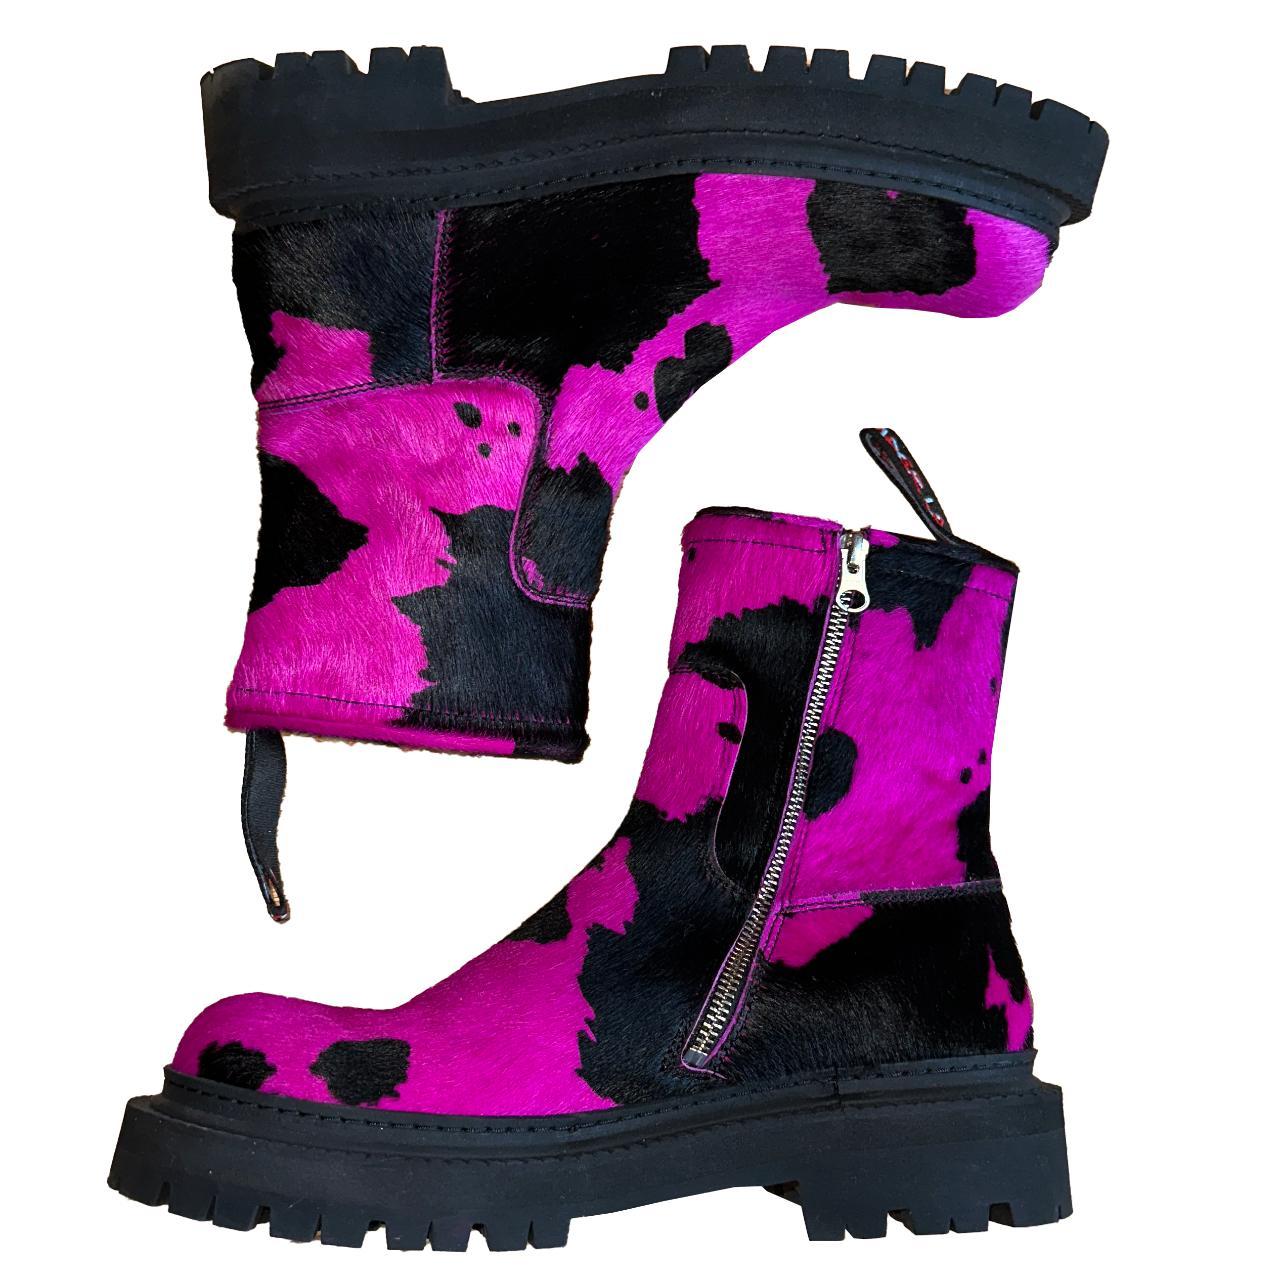 CamperLab Women's Pink and Black Boots